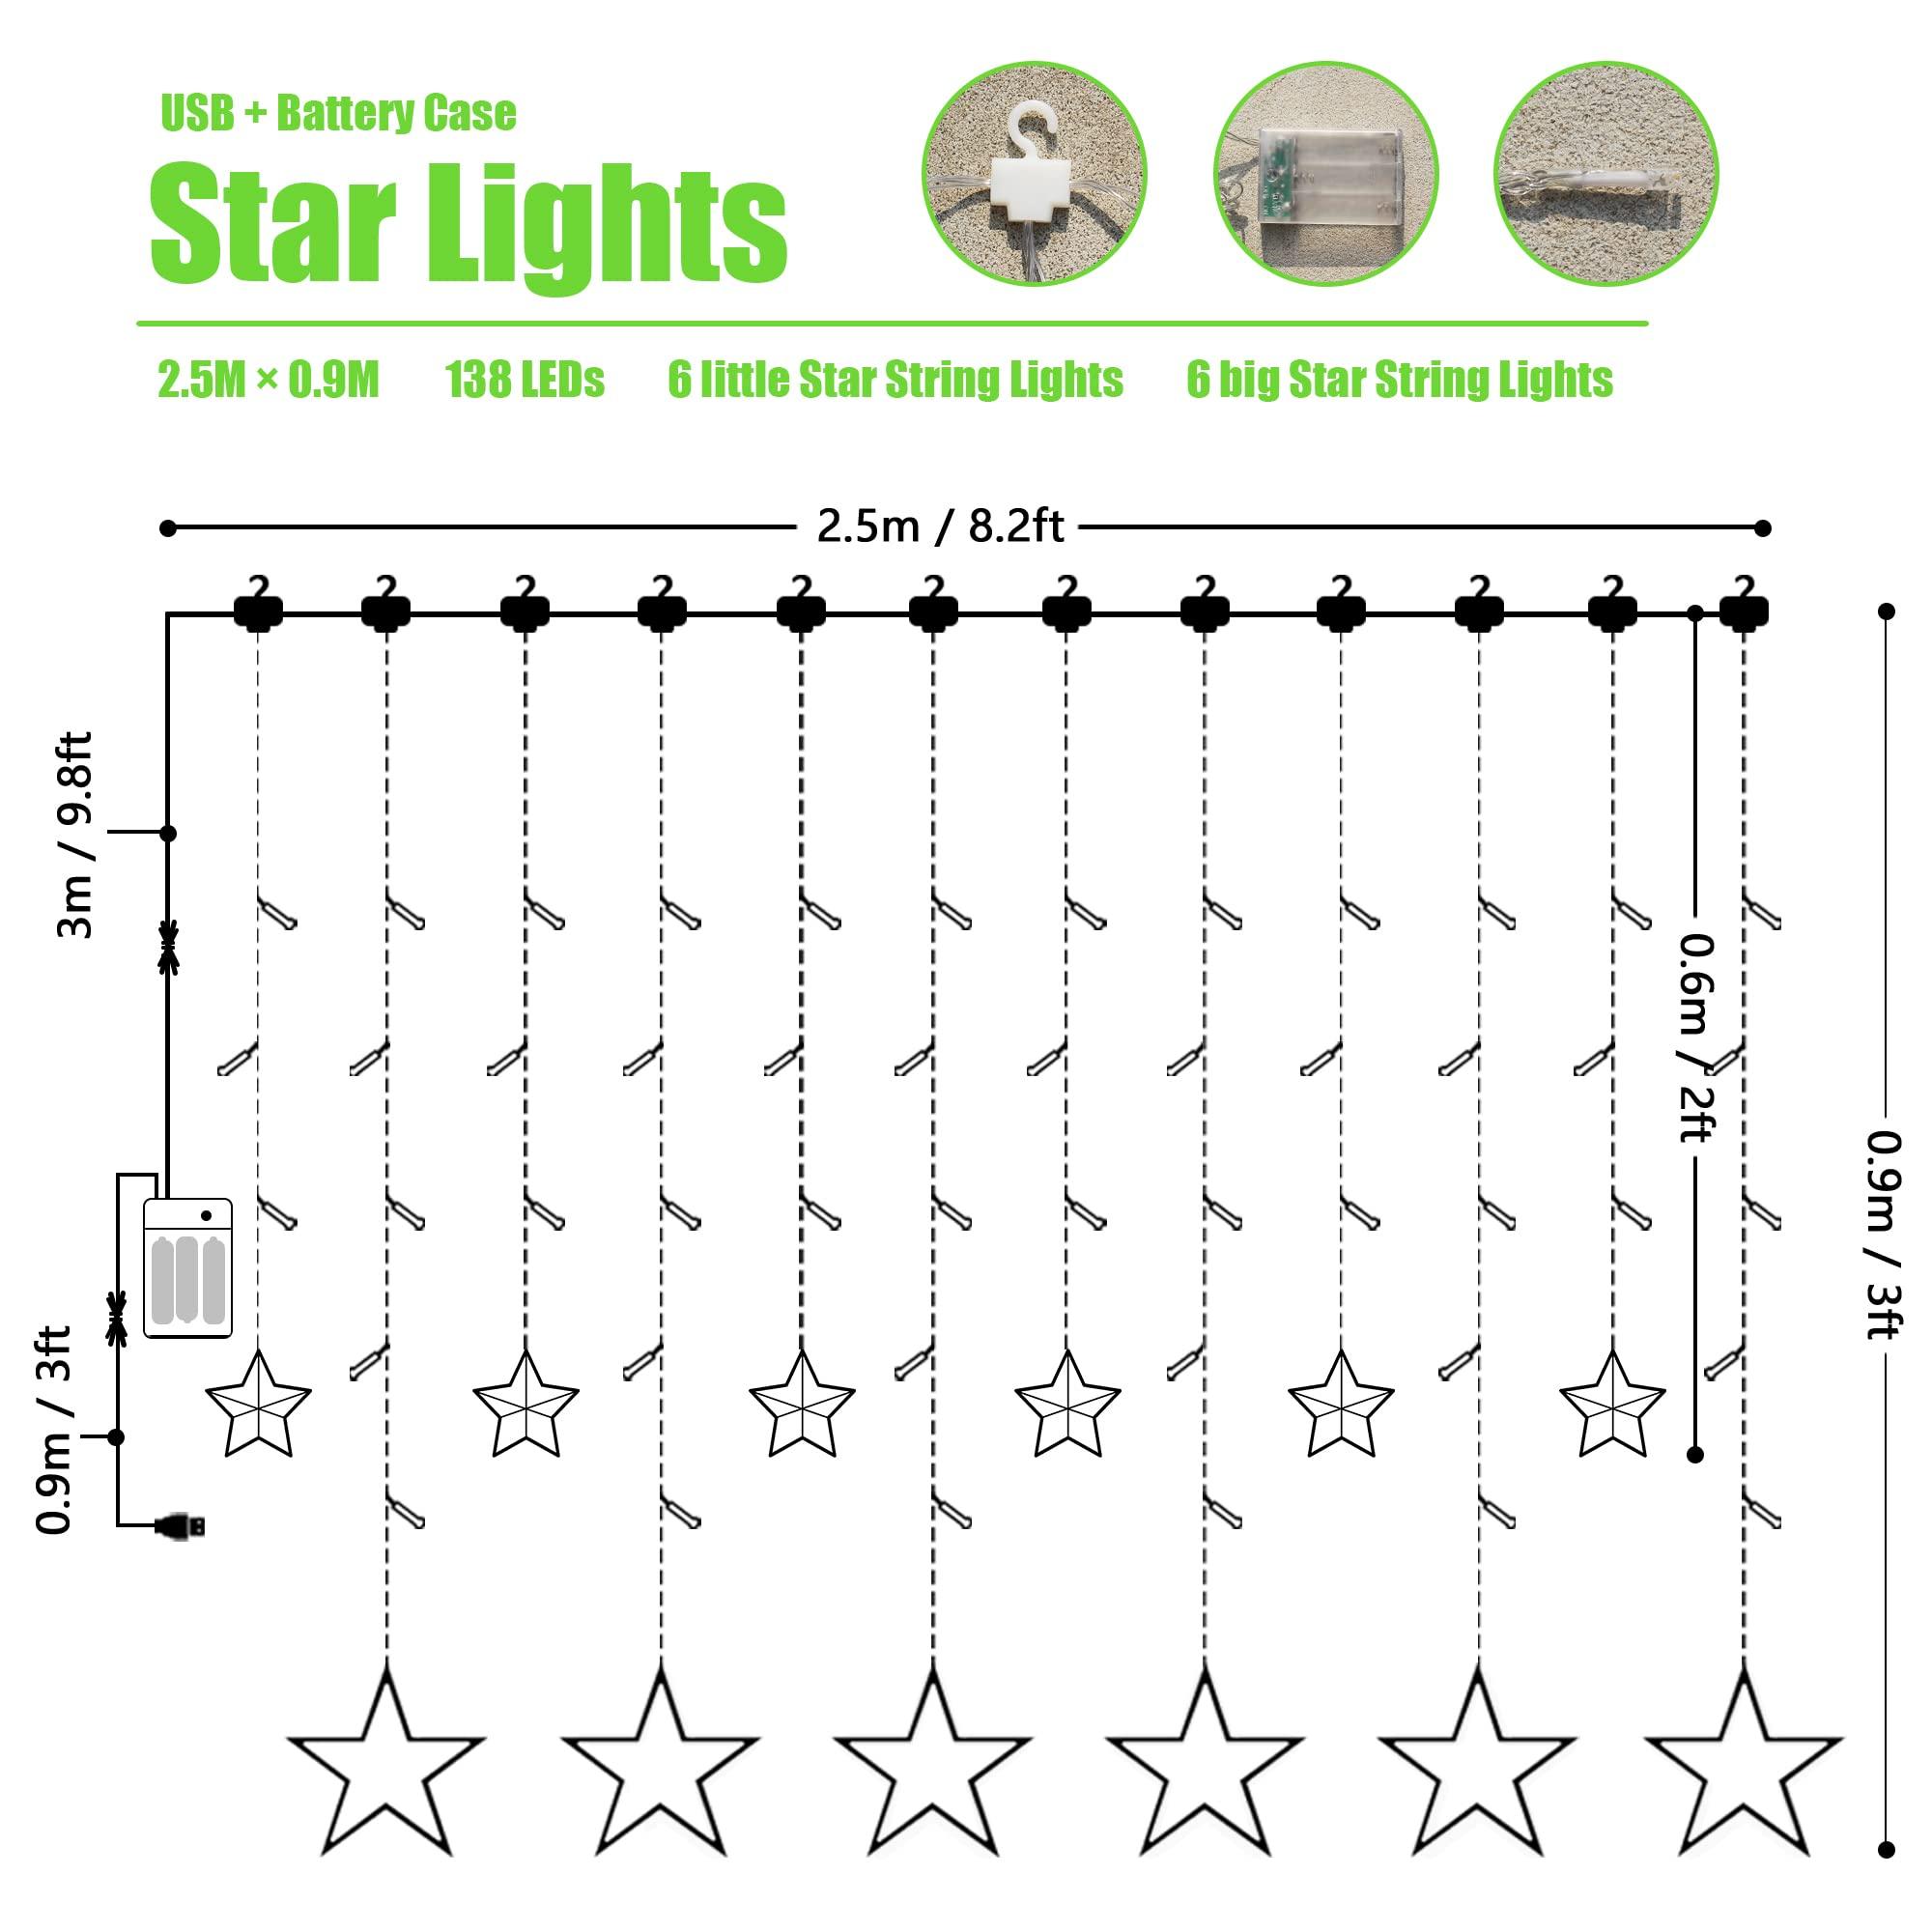 12 Star Curtain Lights with Remote Control 138 LEDs Fairy Light 8 Lighting Modes USB Powered for Bedroom Garden Party Wedding Christmas, Ideale Gift for Family Friends (RGB) 4